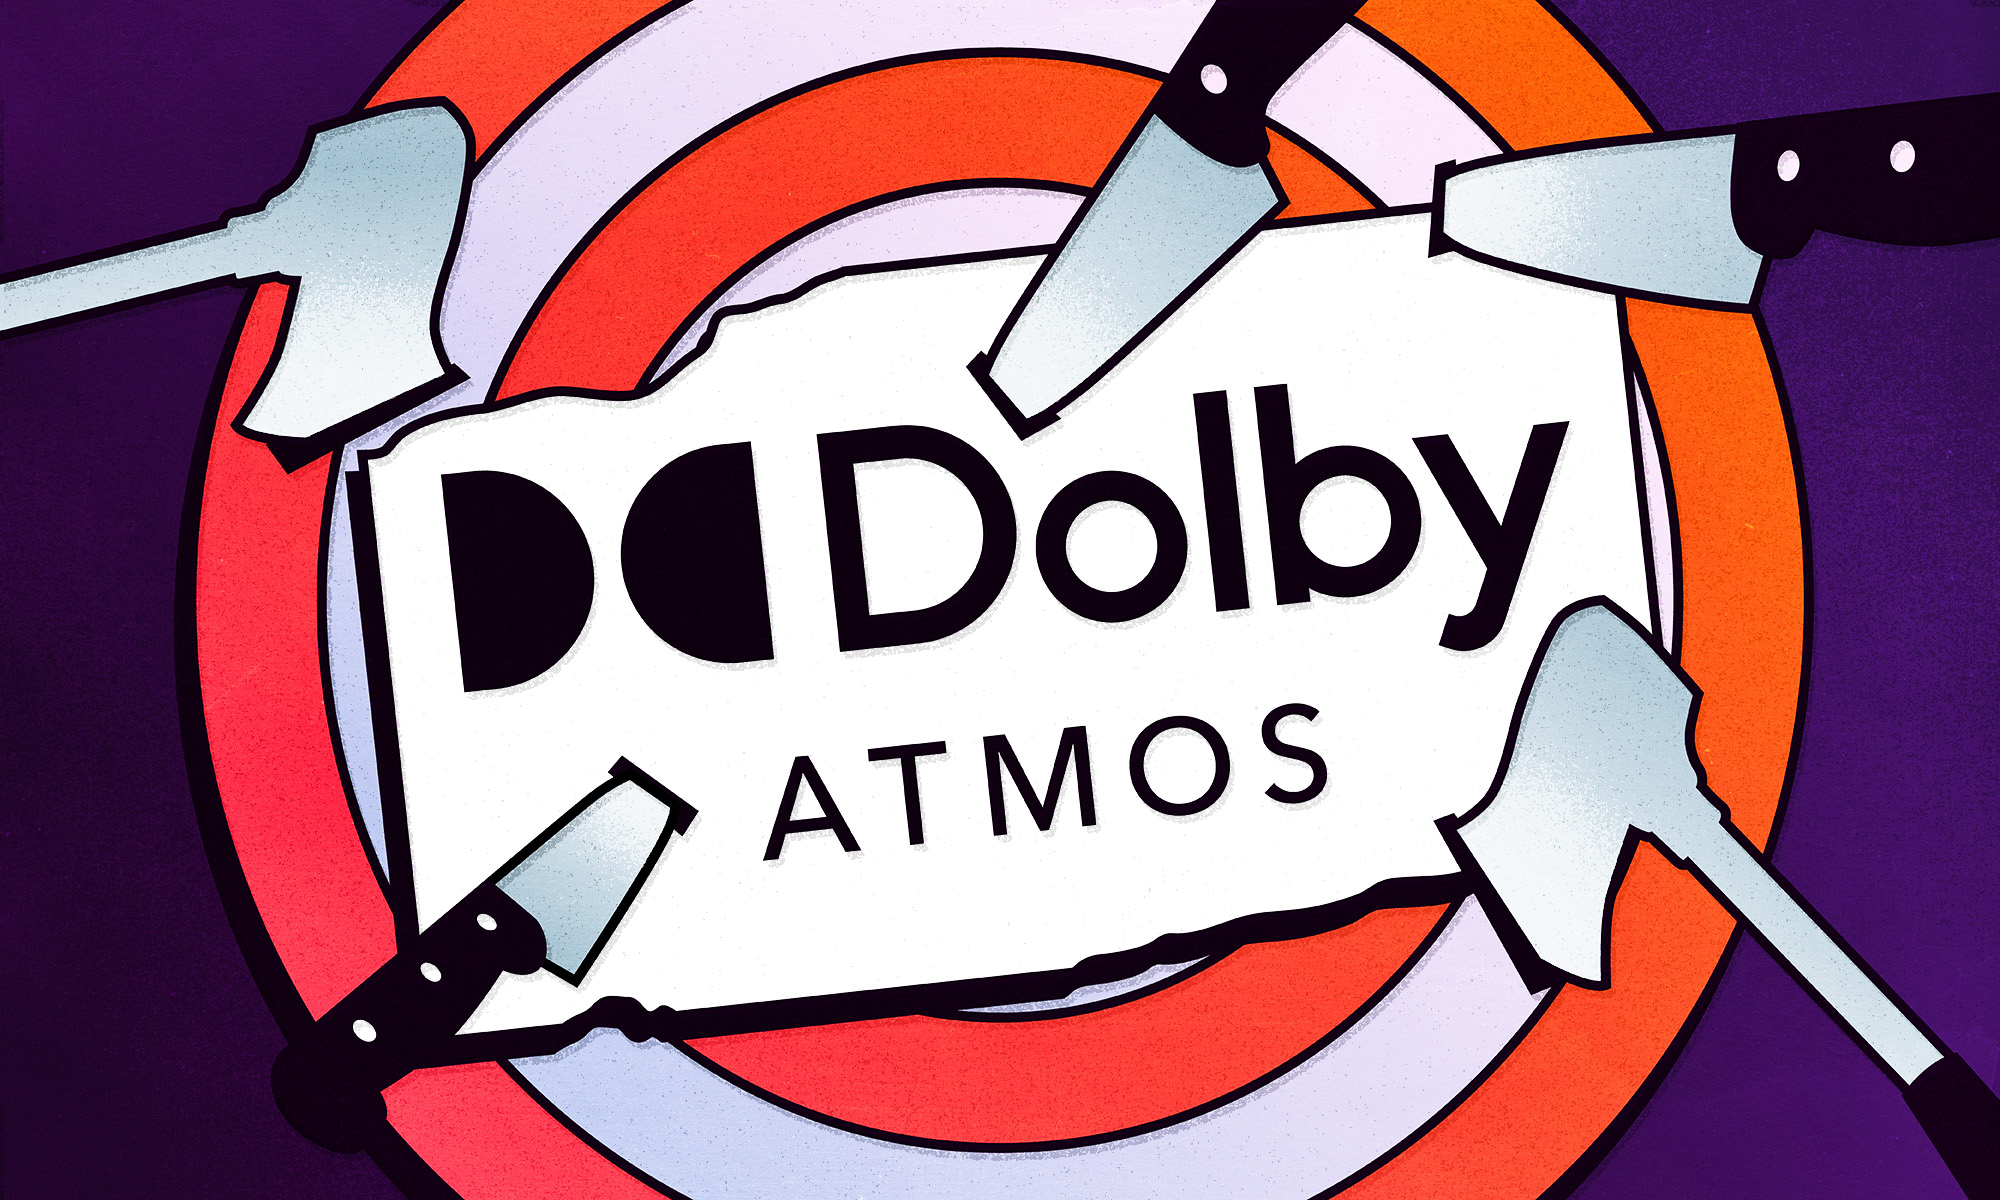 Dolby Atmos Under attack.